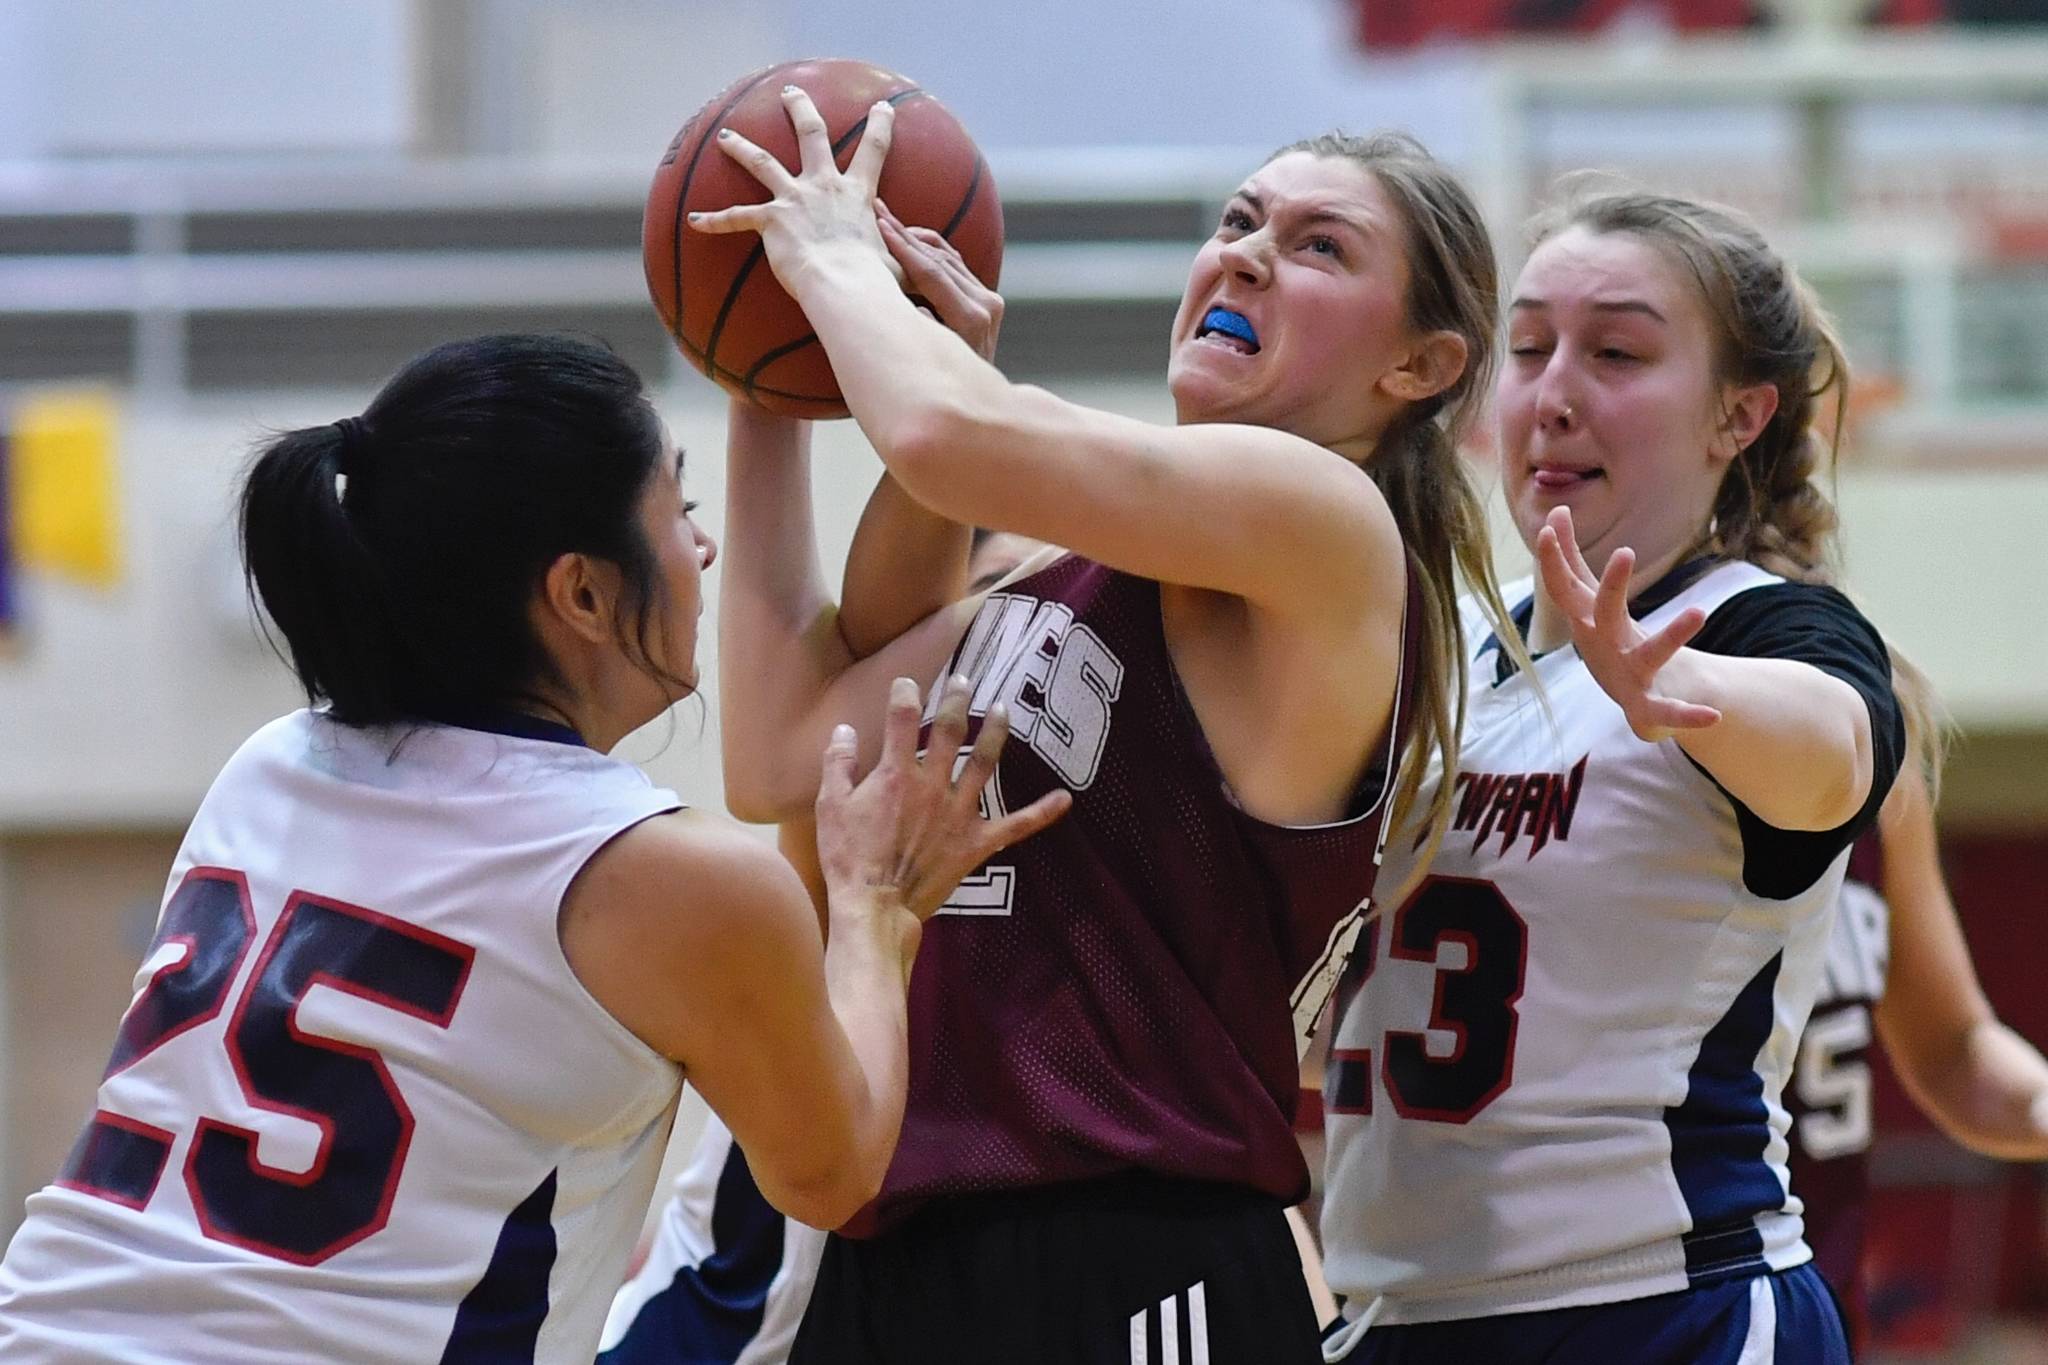 Haines’ Liz Segars, center, powers her way between Yakutat ‘s Violet Slatterly, left, and Janie Jensen at the Gold Medal Basketball Tournament on Friday, March 22, 2019. (Michael Penn | Juneau Empire)